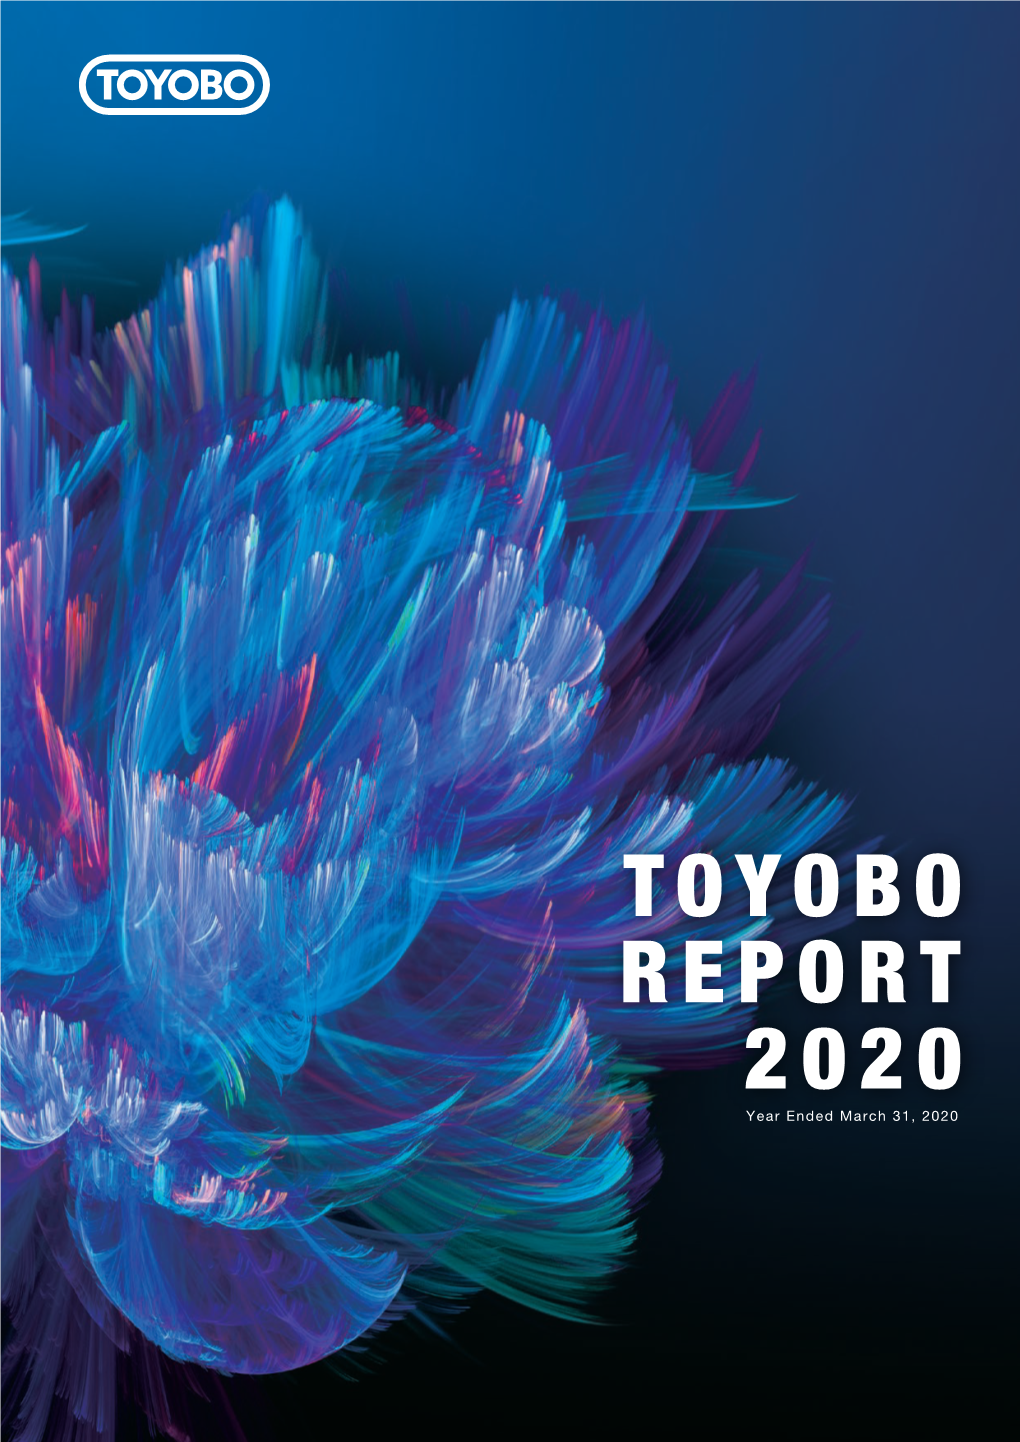 TOYOBO REPORT 2020 Year Ended March 31, 2020 Value Creation Vision & Policy